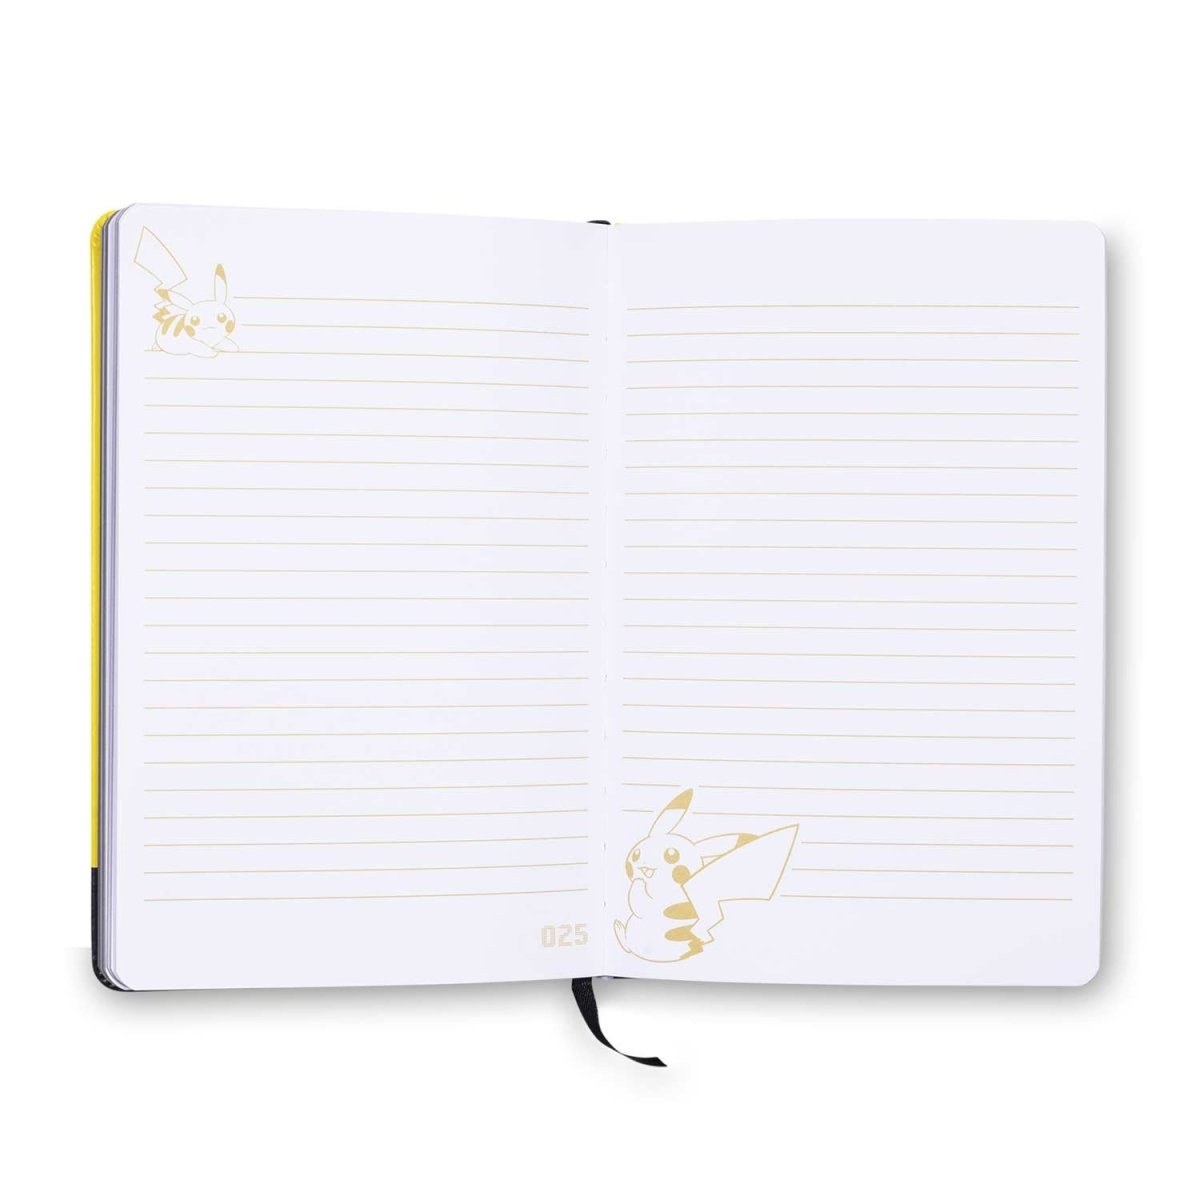  Pikachu 2 Pack Blank Unruled Spiral Notebook, 10.3 x 7.3  inches, About 75 Sheets Each, 2 Random Color Notebook Will Be Sent… :  Office Products